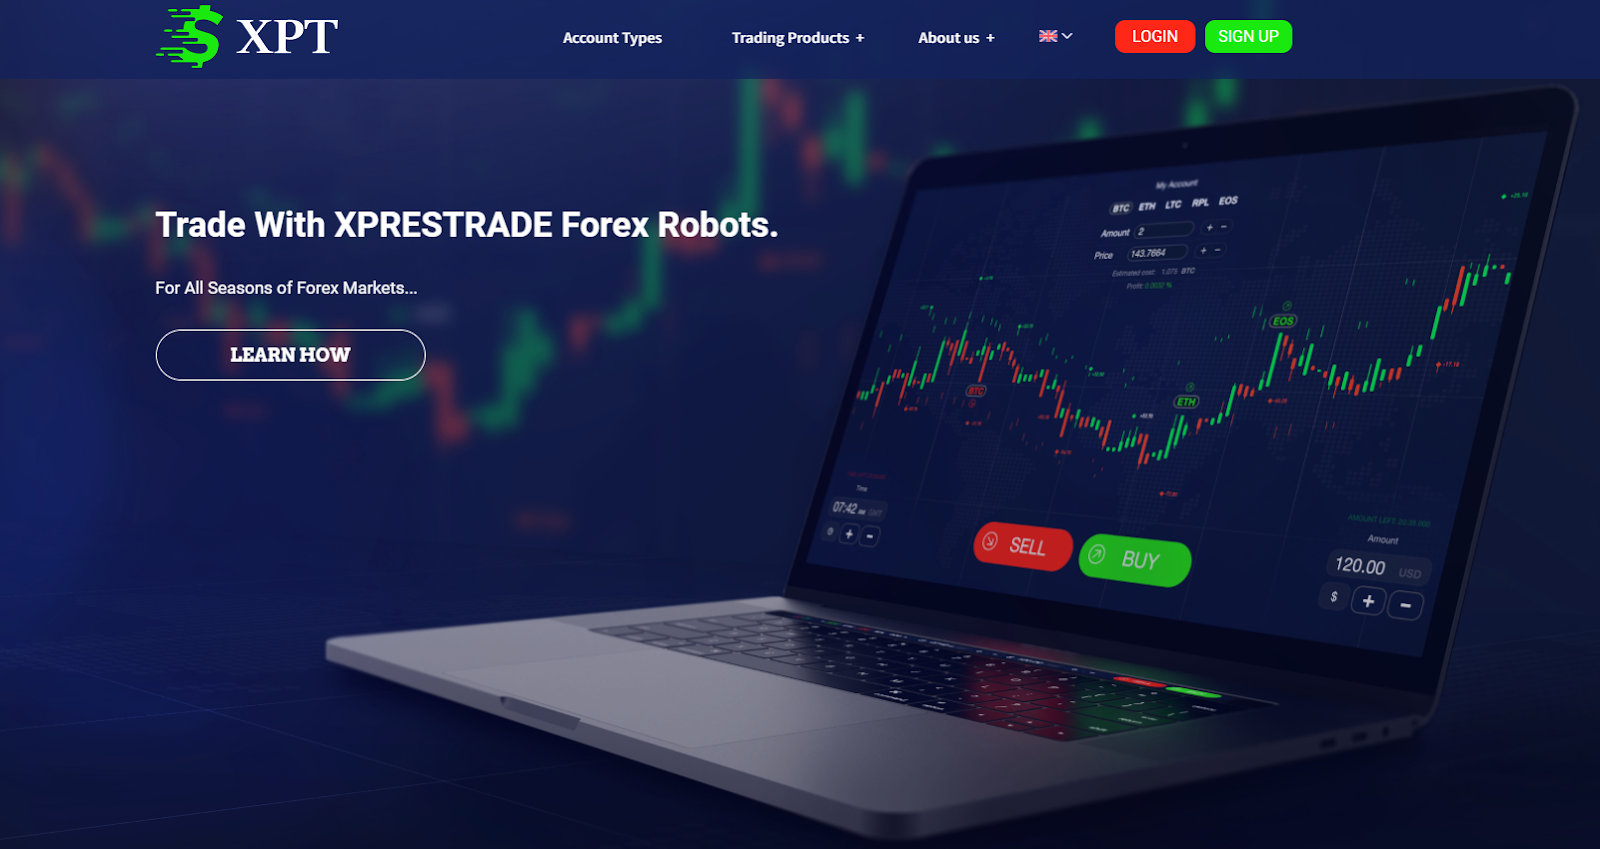 trade CFDs with Xprestrade